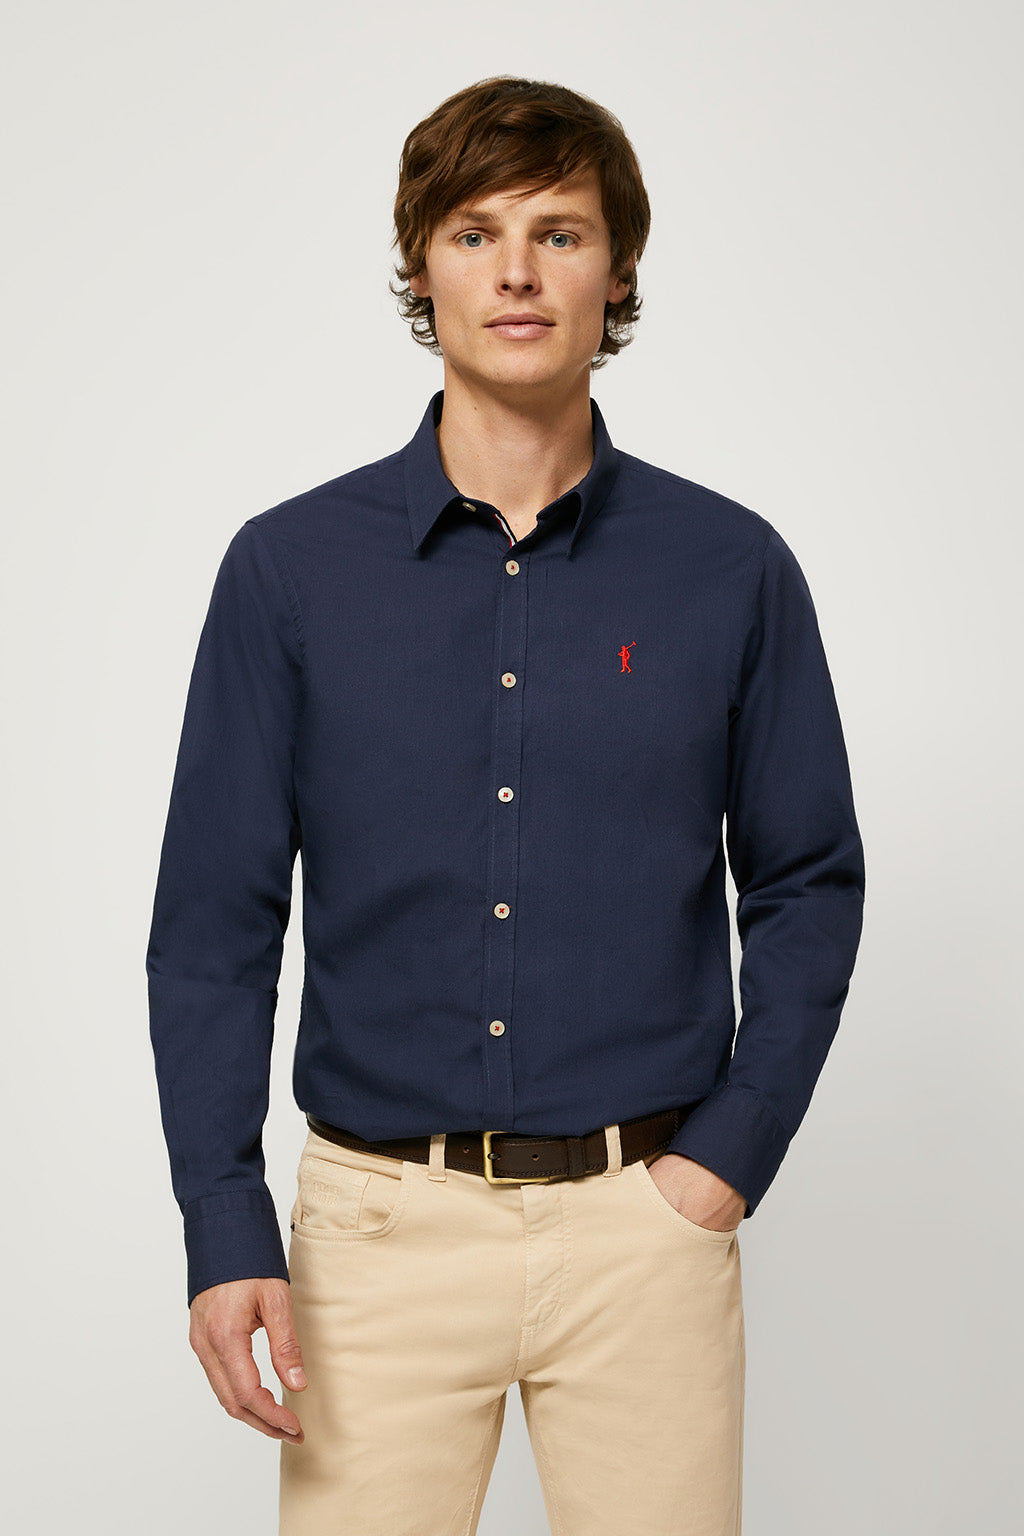 Inclinarse Saturar Convocar Navy blue slim-fit shirt with embroidered logo – Polo Club Europe